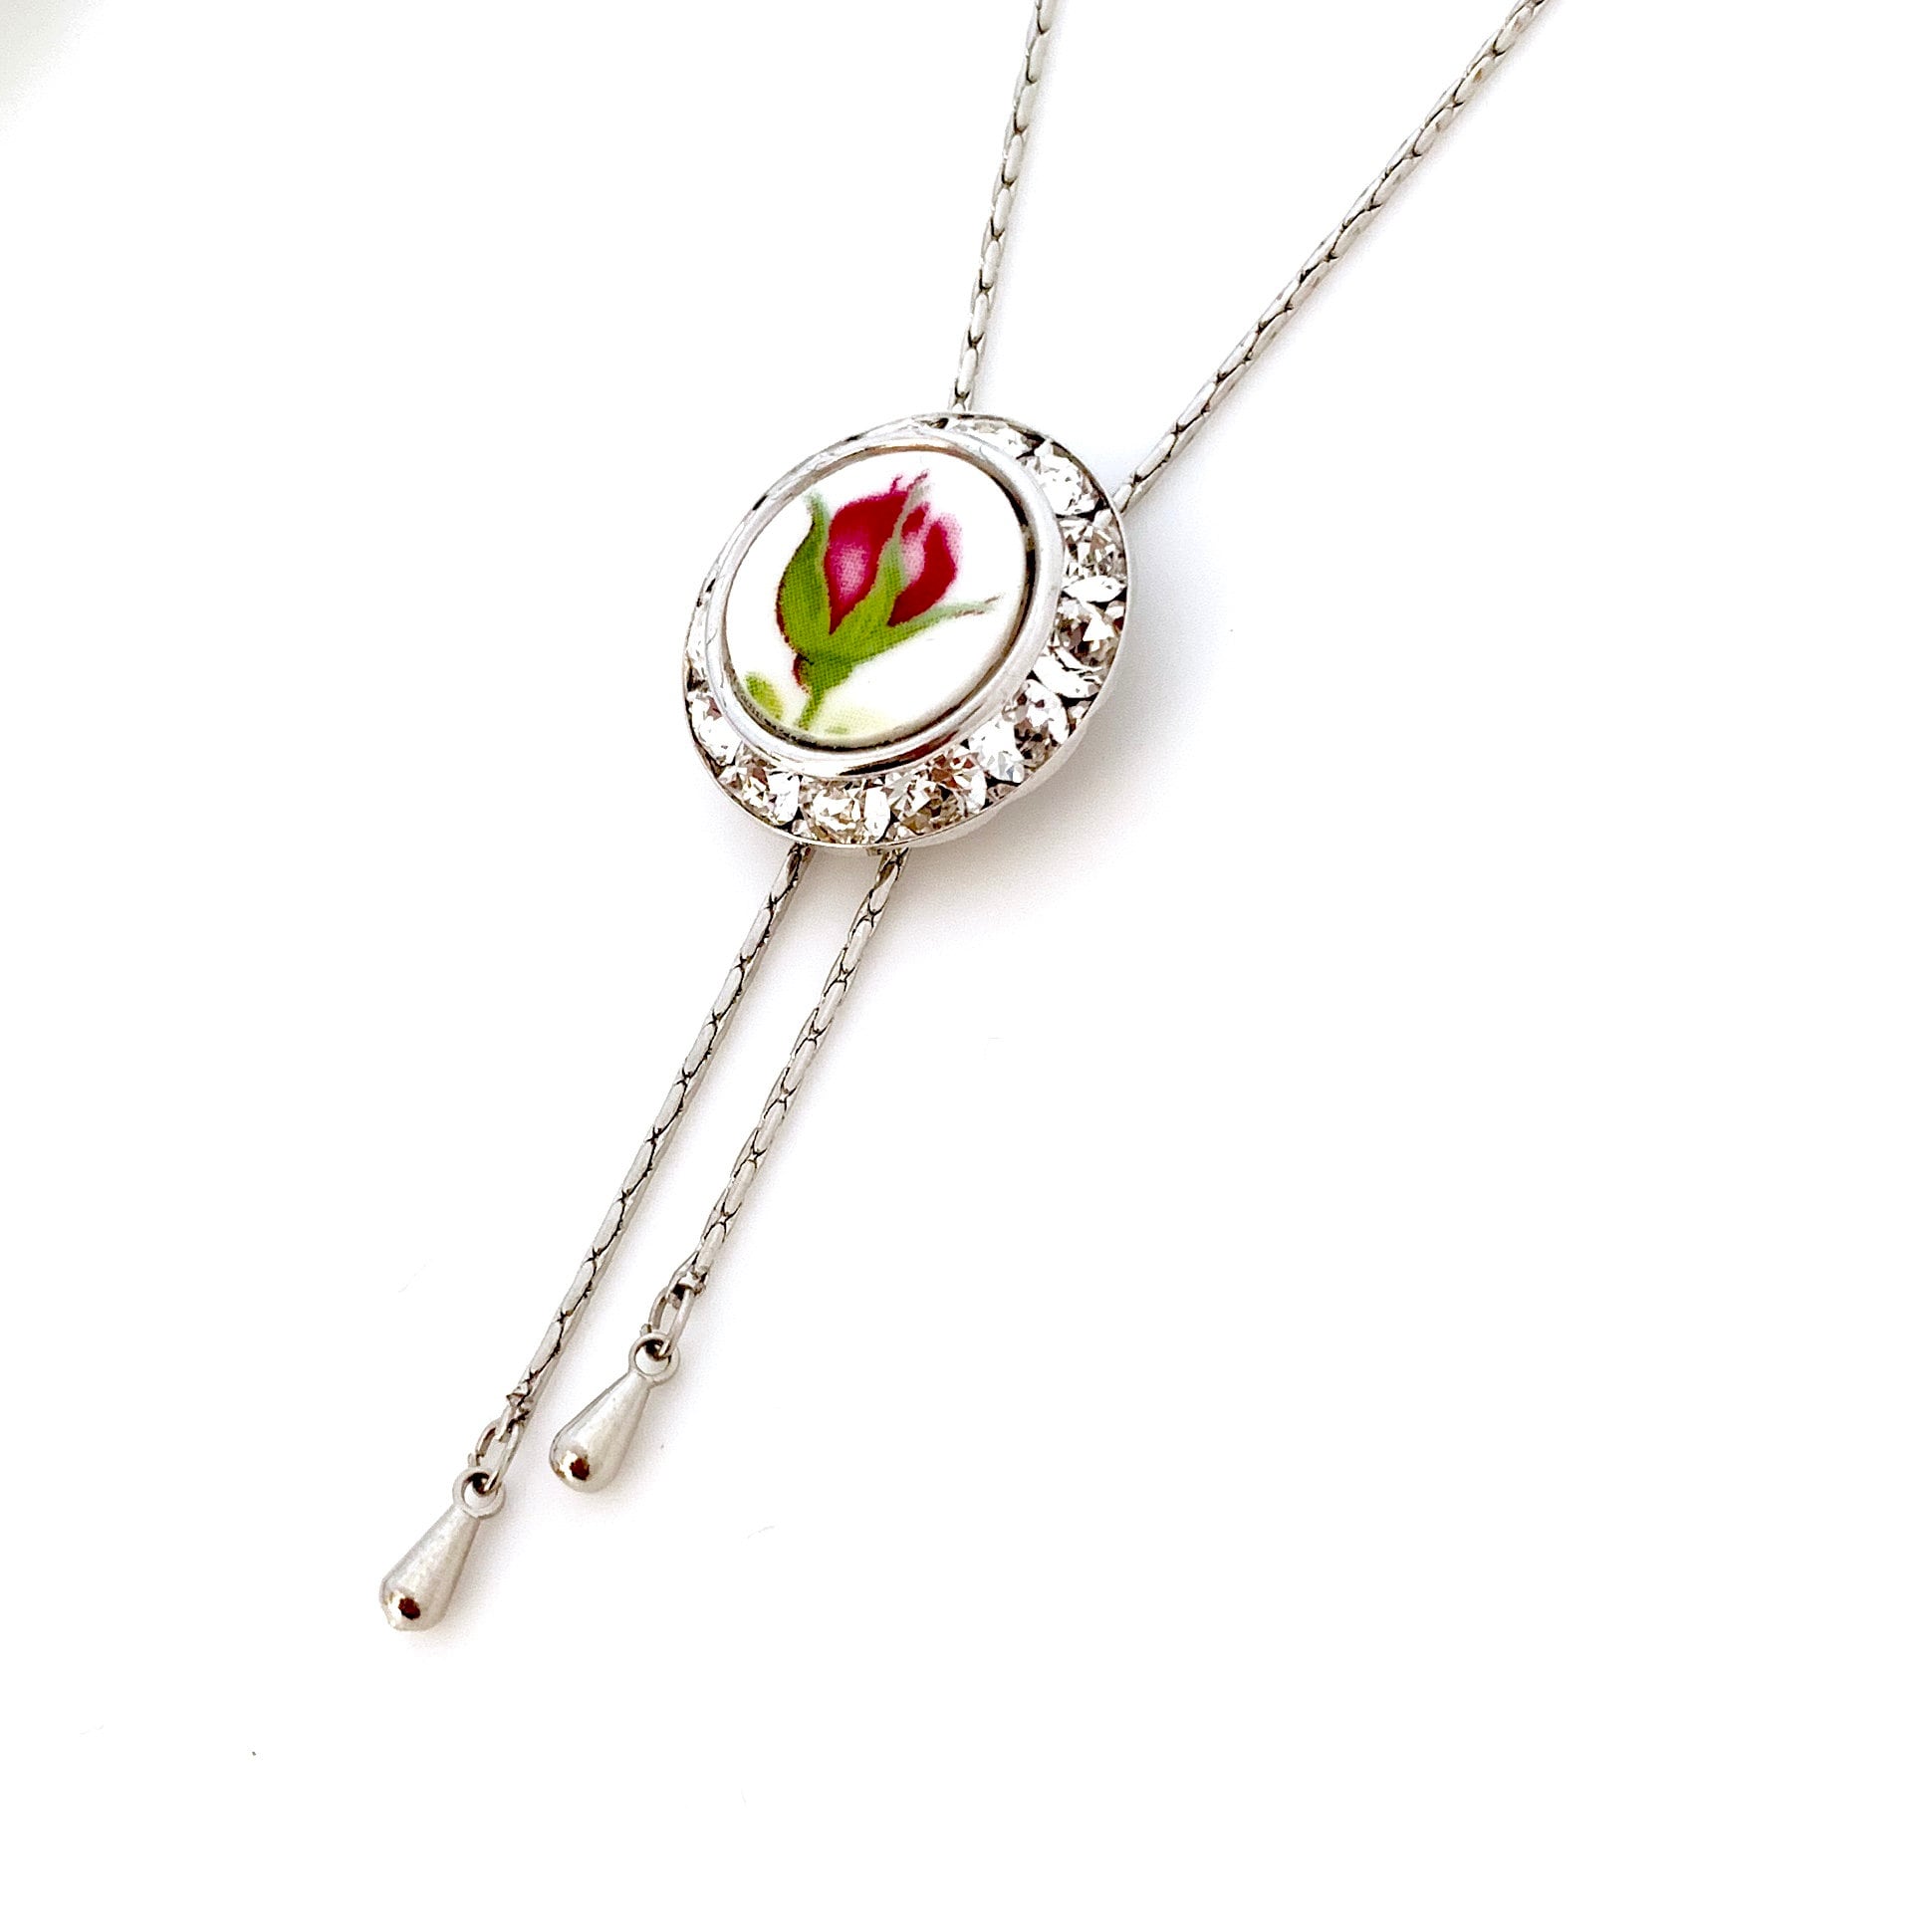 Adjustable Broken China Jewelry Necklace Old Country Roses, Crystal Bolo Tie for Women, Gifts for Women